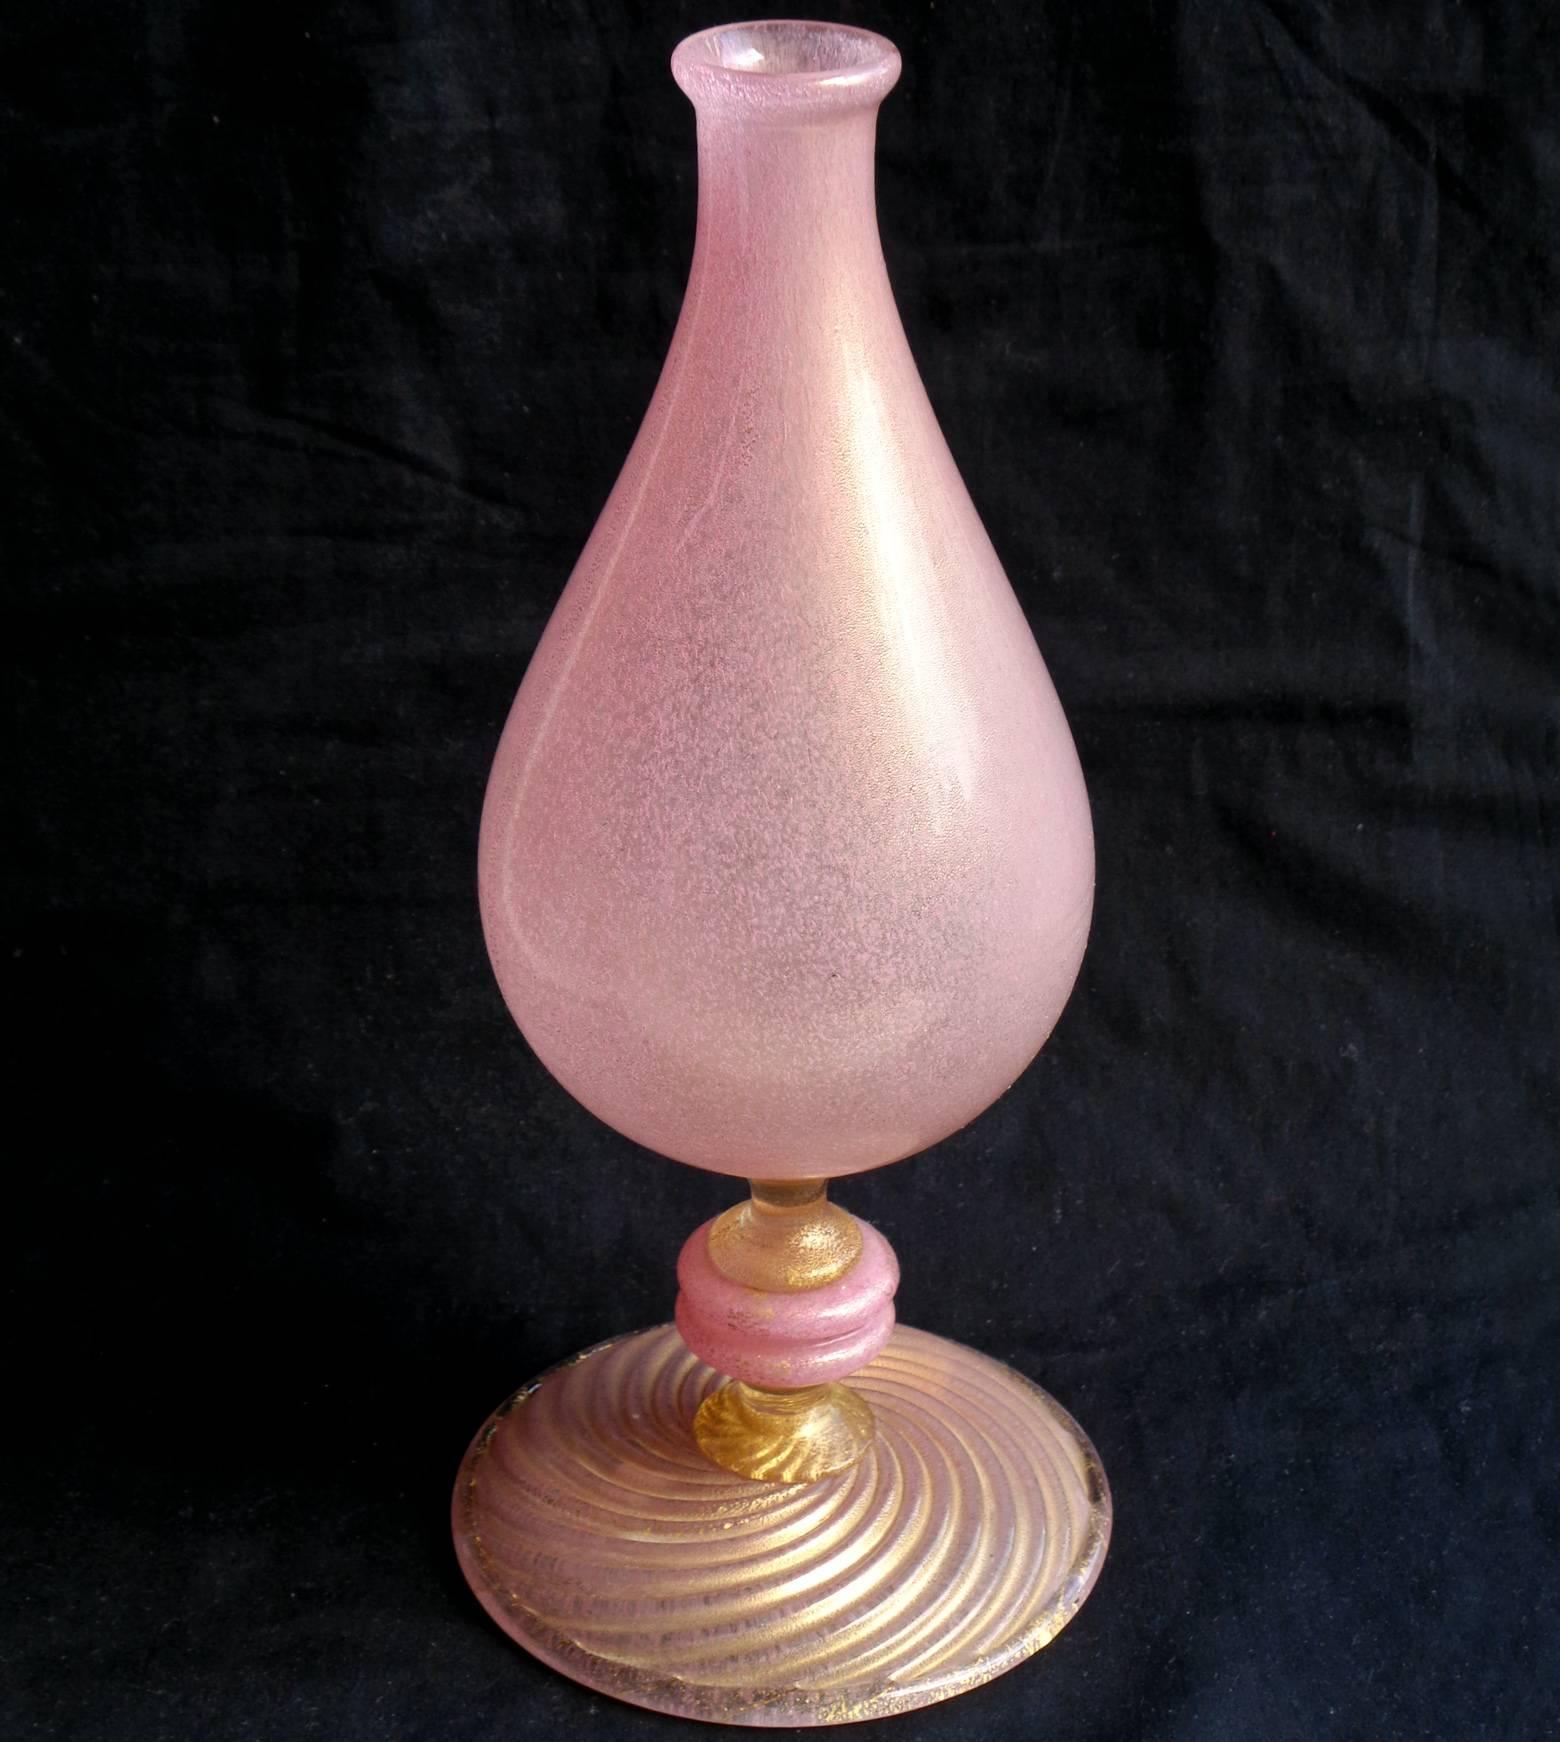 Stunning Murano hand blown pink and gold flecks Italian art glass specimen flower vase. Documented to the Barovier e Toso company, with original model number label underneath. Purchased from the Christies auction house in the 1990s. Collectors item!